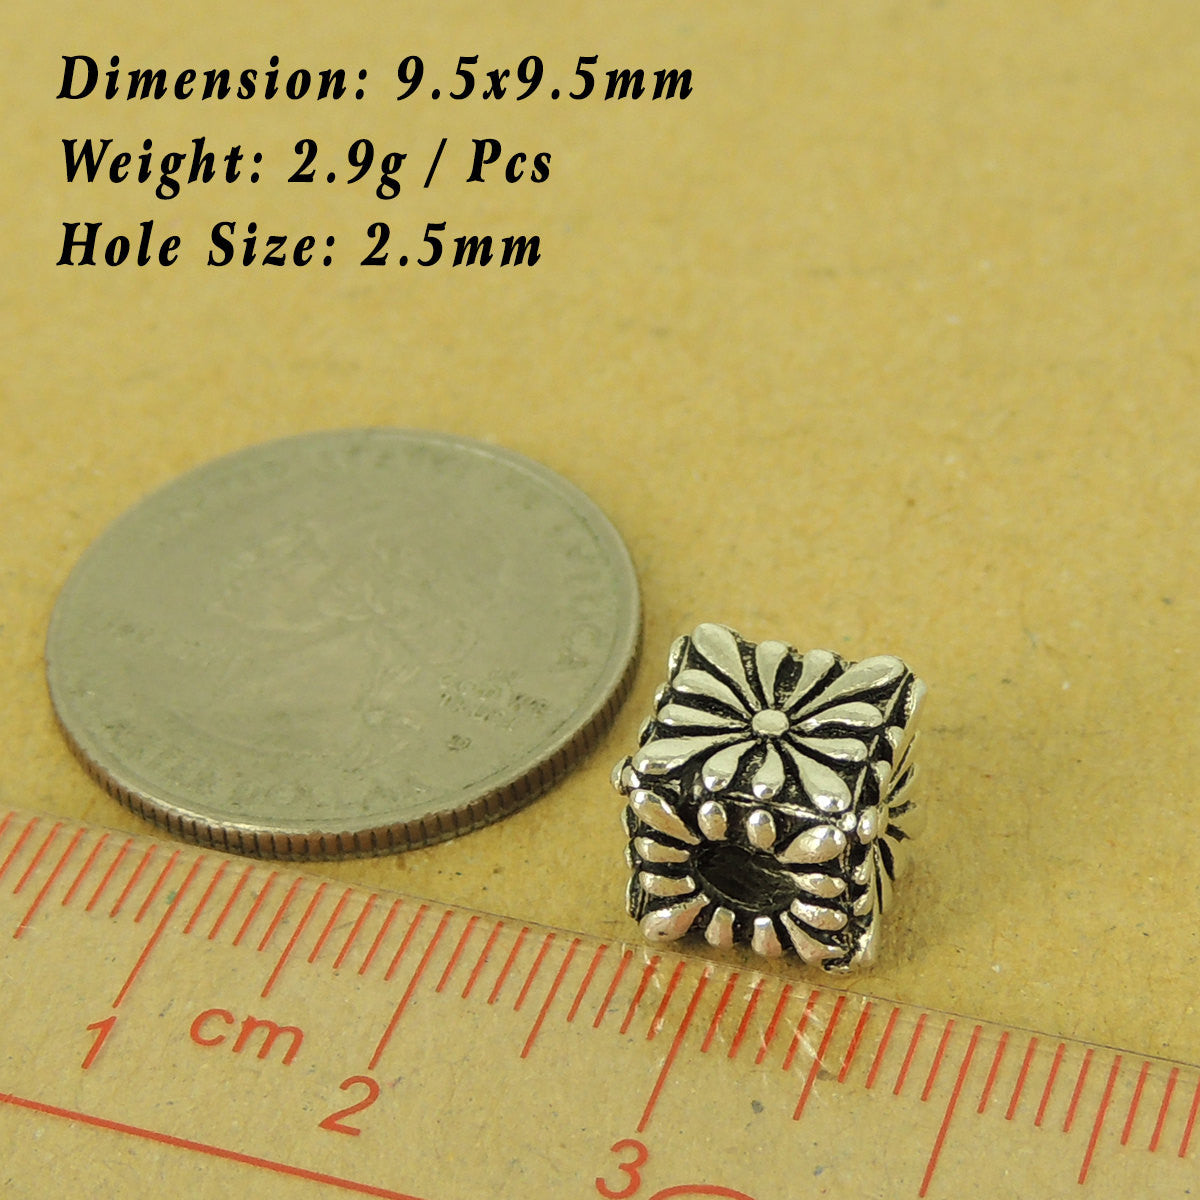 1 PC 70's Floral Flower Cube - Genuine S925 Sterling Silver